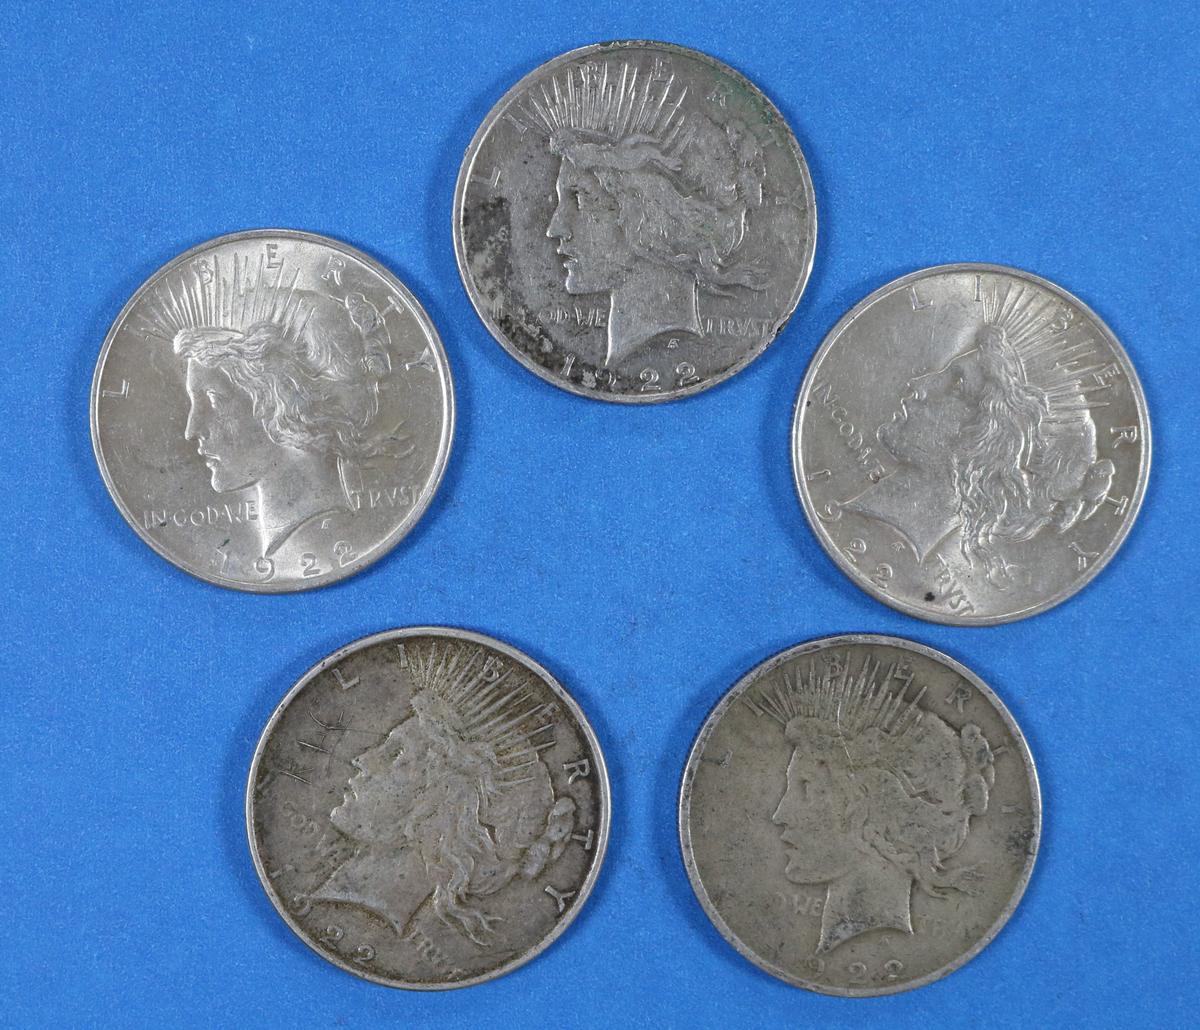 Lot of 5 Peace Silver Dollars 1922